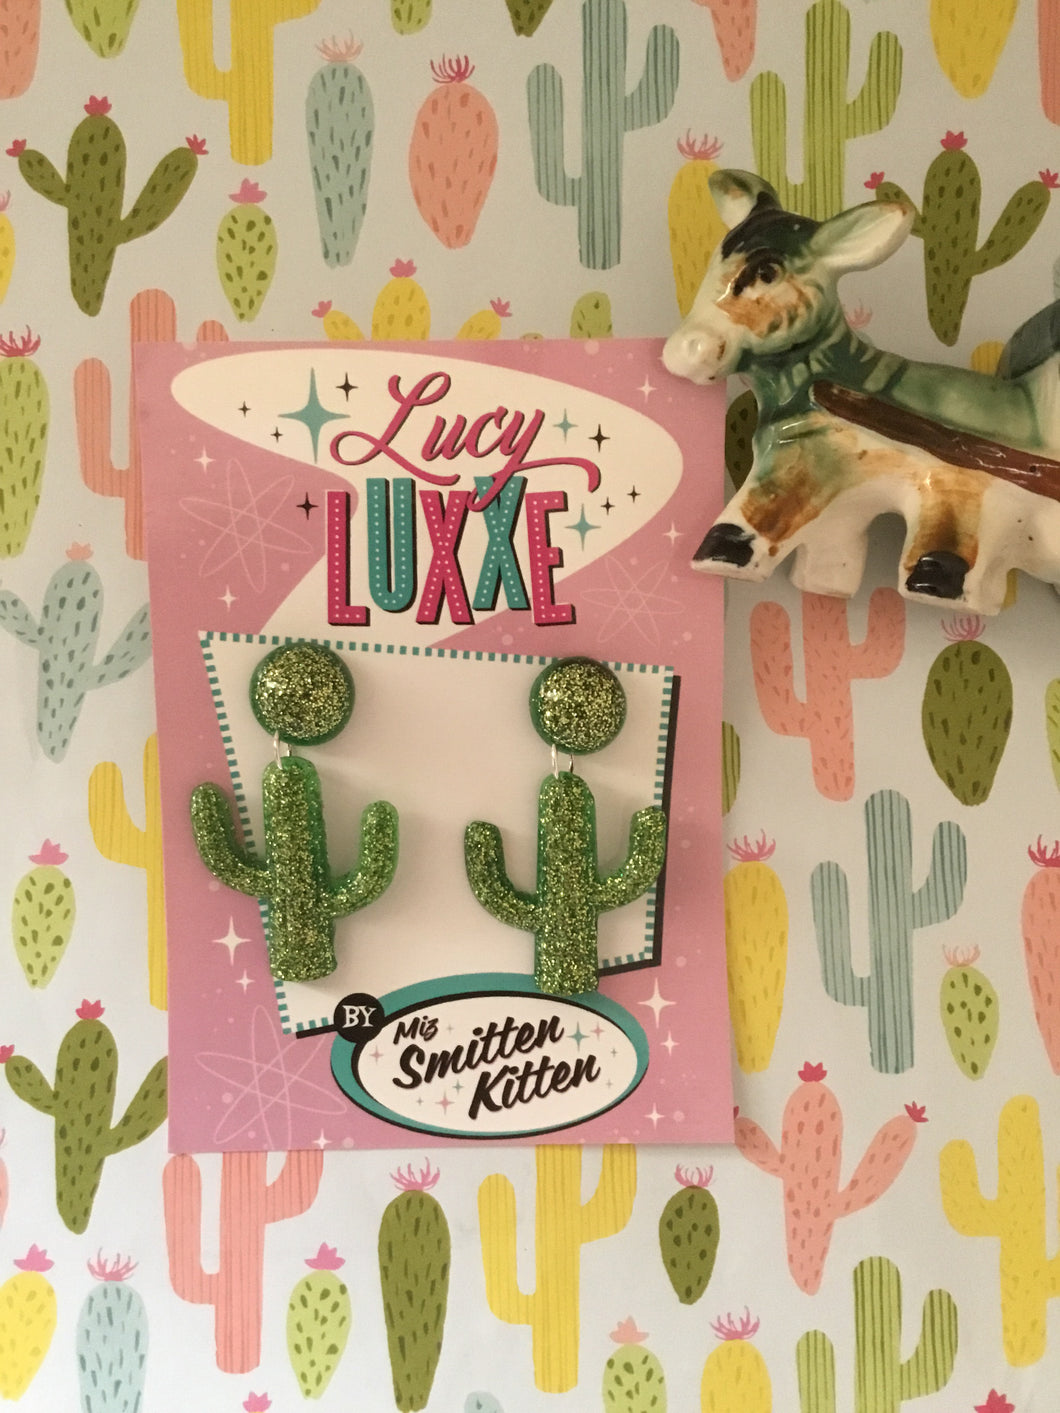 SOUTH OF THE BORDER - cactus 🌵earrings - green / gold